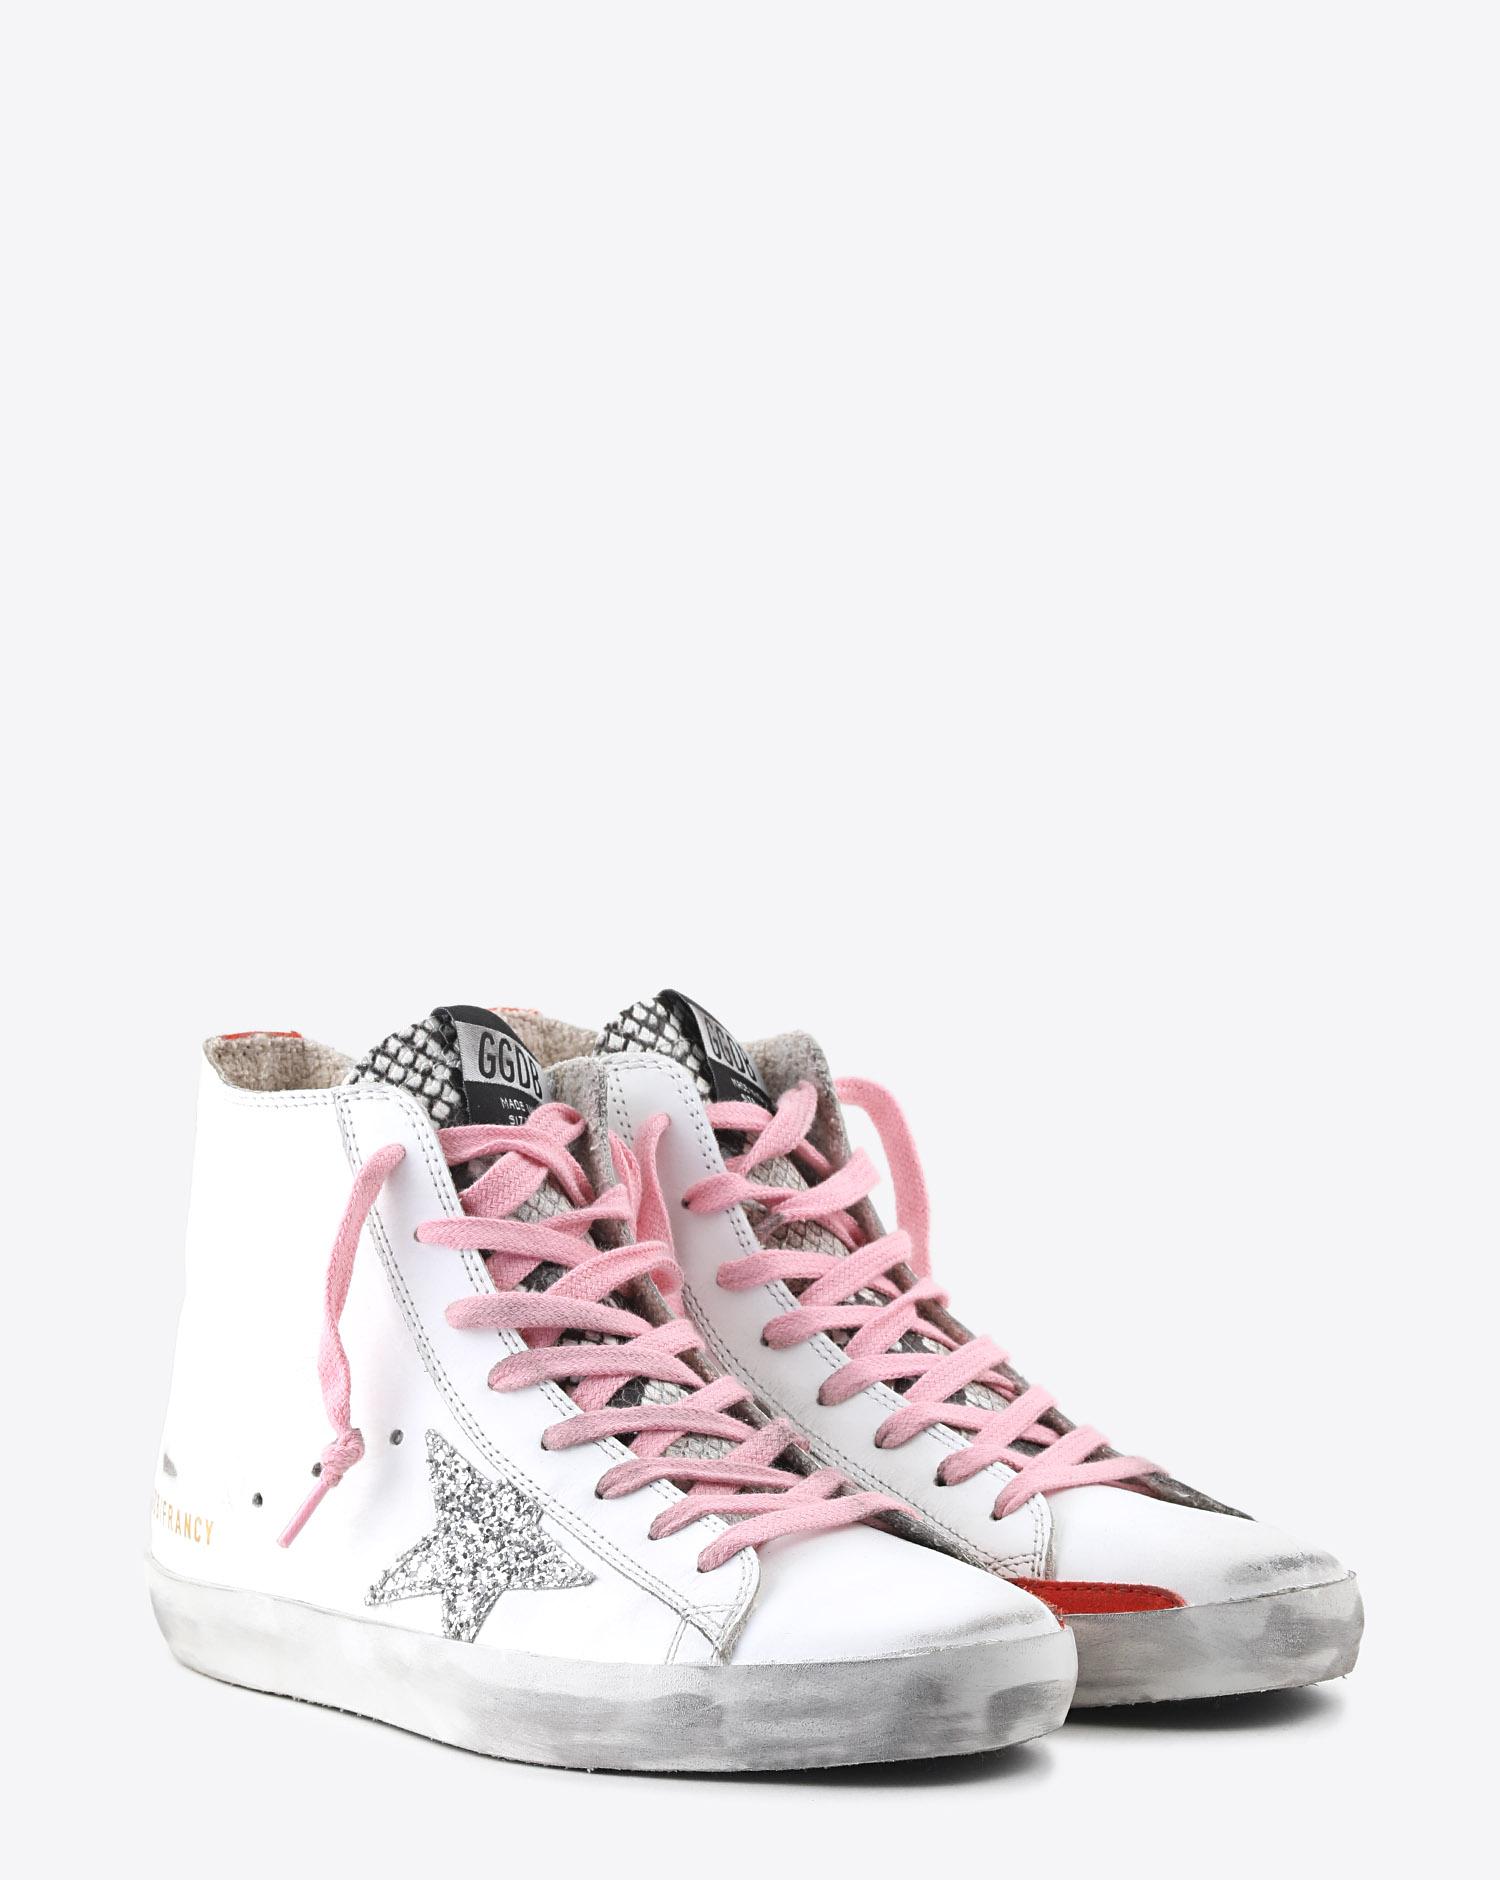 Golden Goose Woman Collection Sneakers Francy - White Leather - Silver Glitter Star  